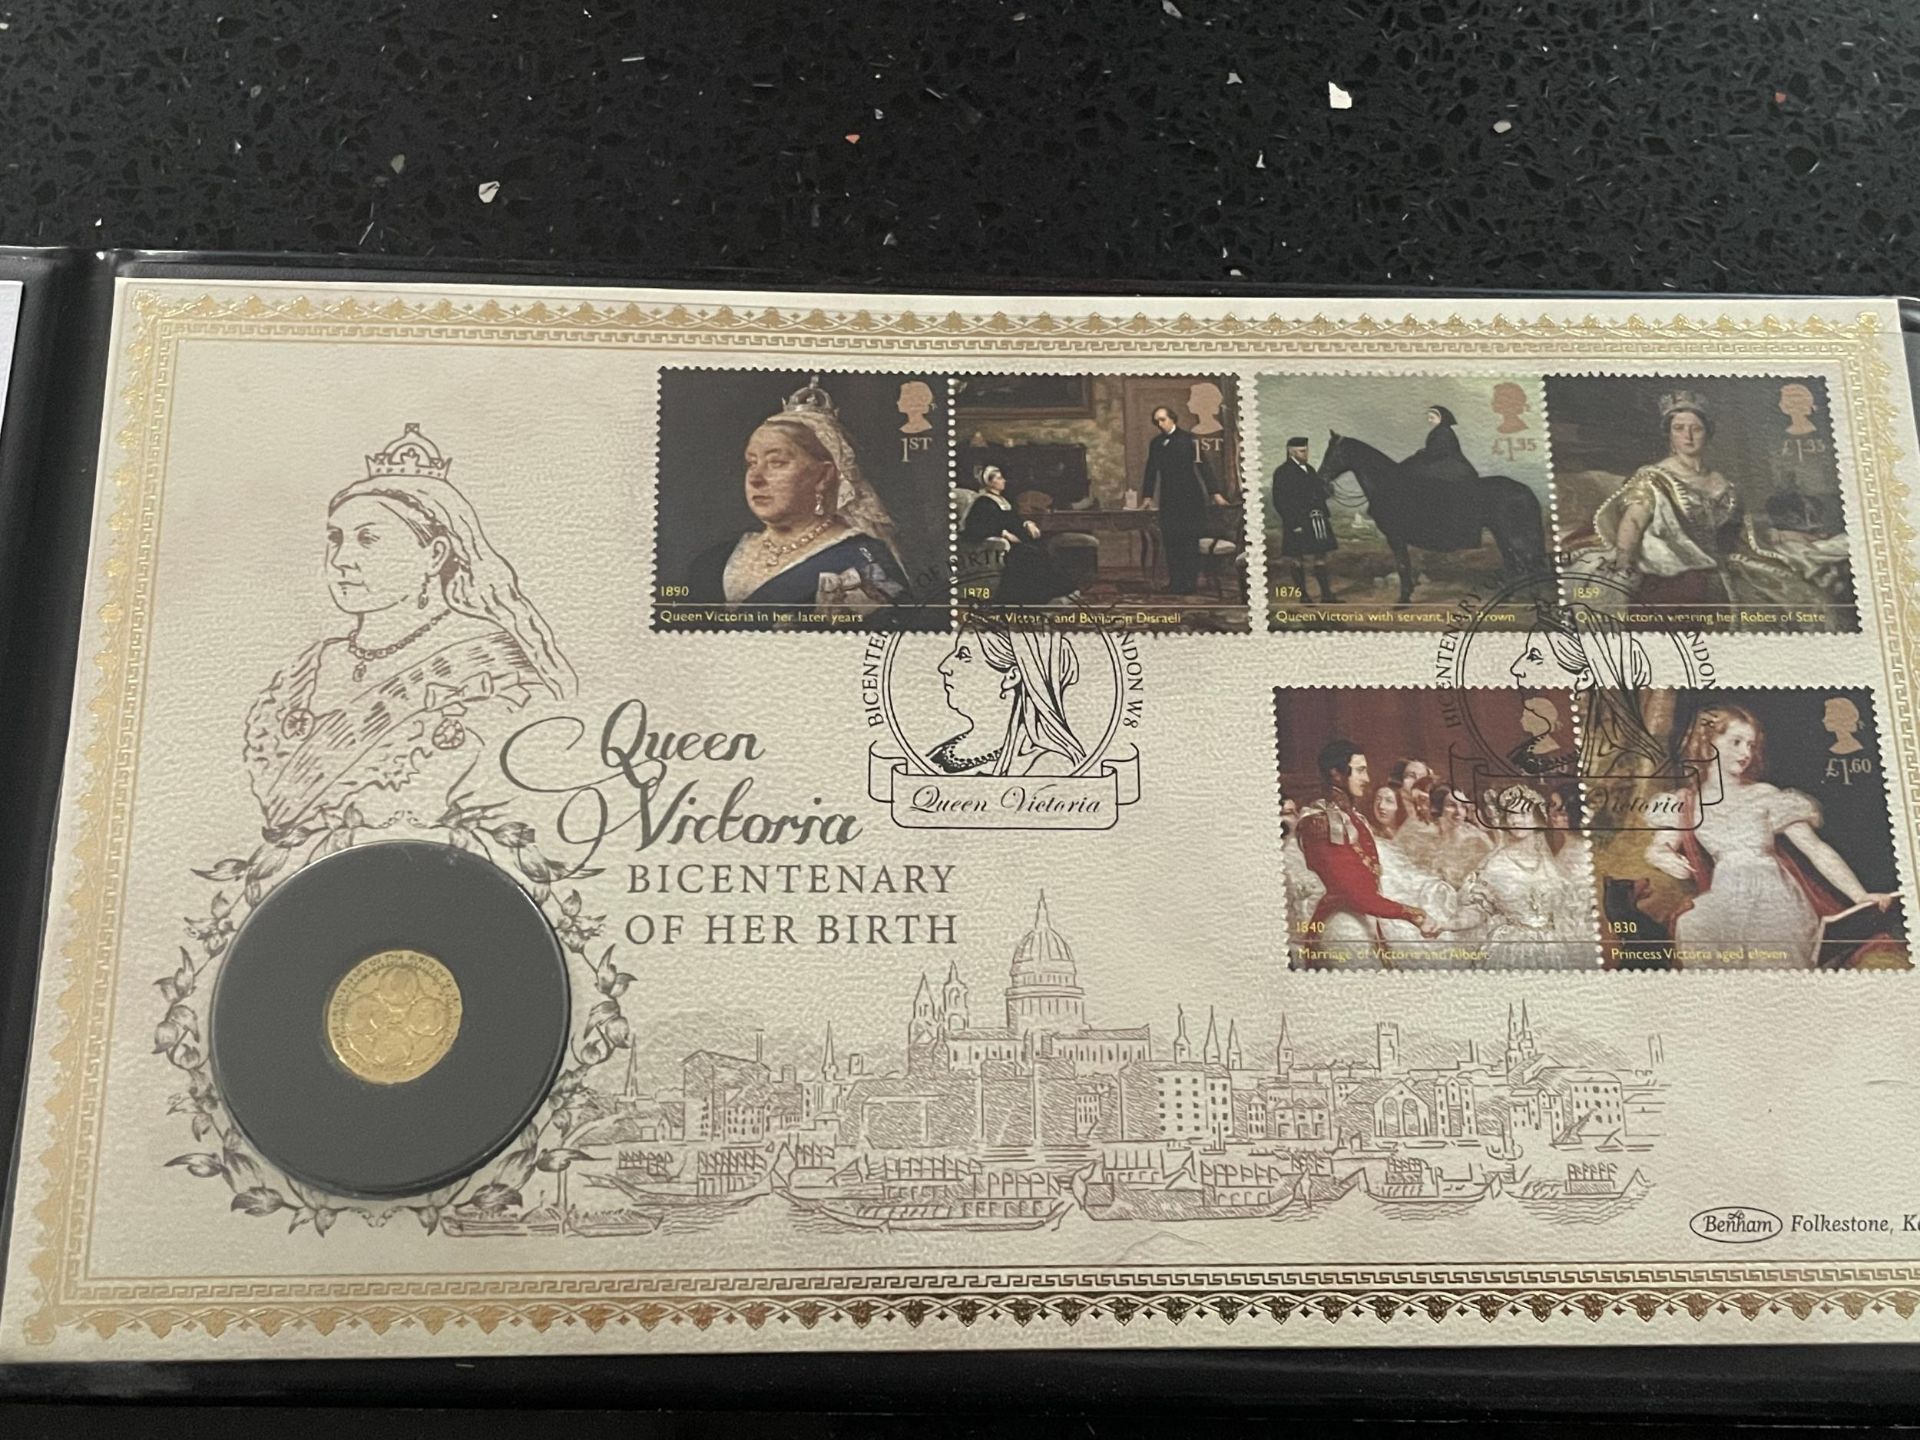 A 200TH ANNIVERSARY OF QUEEN VICTORIA 9 CARAT GOLD COMMEMORATIVE COIN COVER - LIMITED EDITION OF 299 - Image 2 of 4